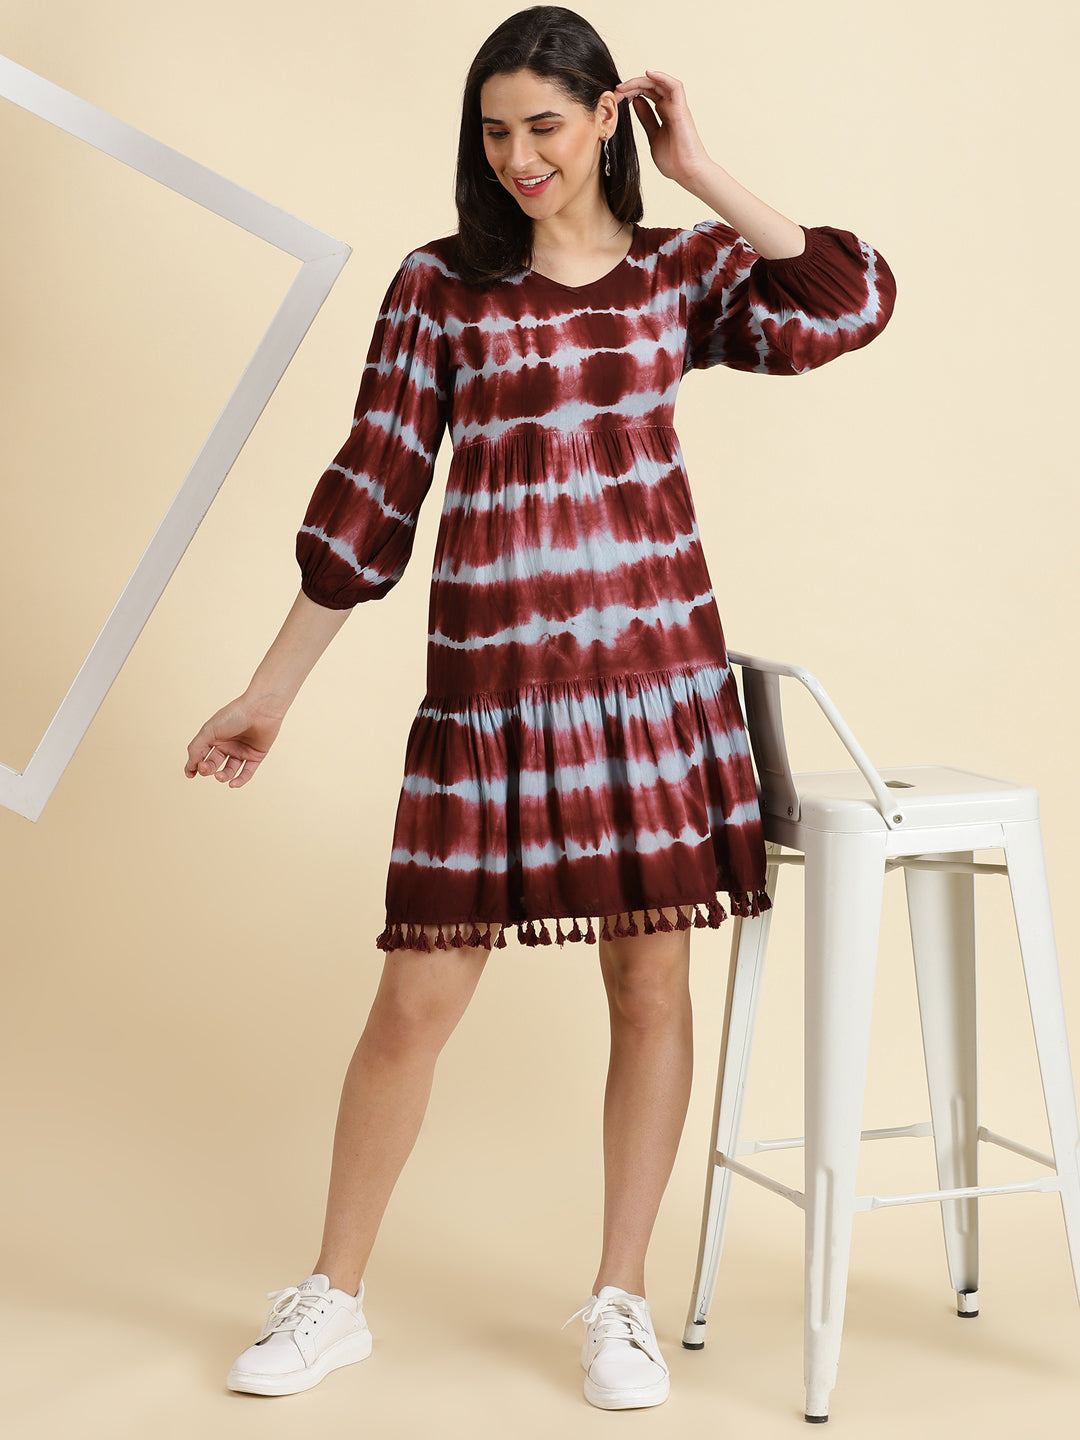 Women's Burgundy Tie Dye Fit and Flare Dress